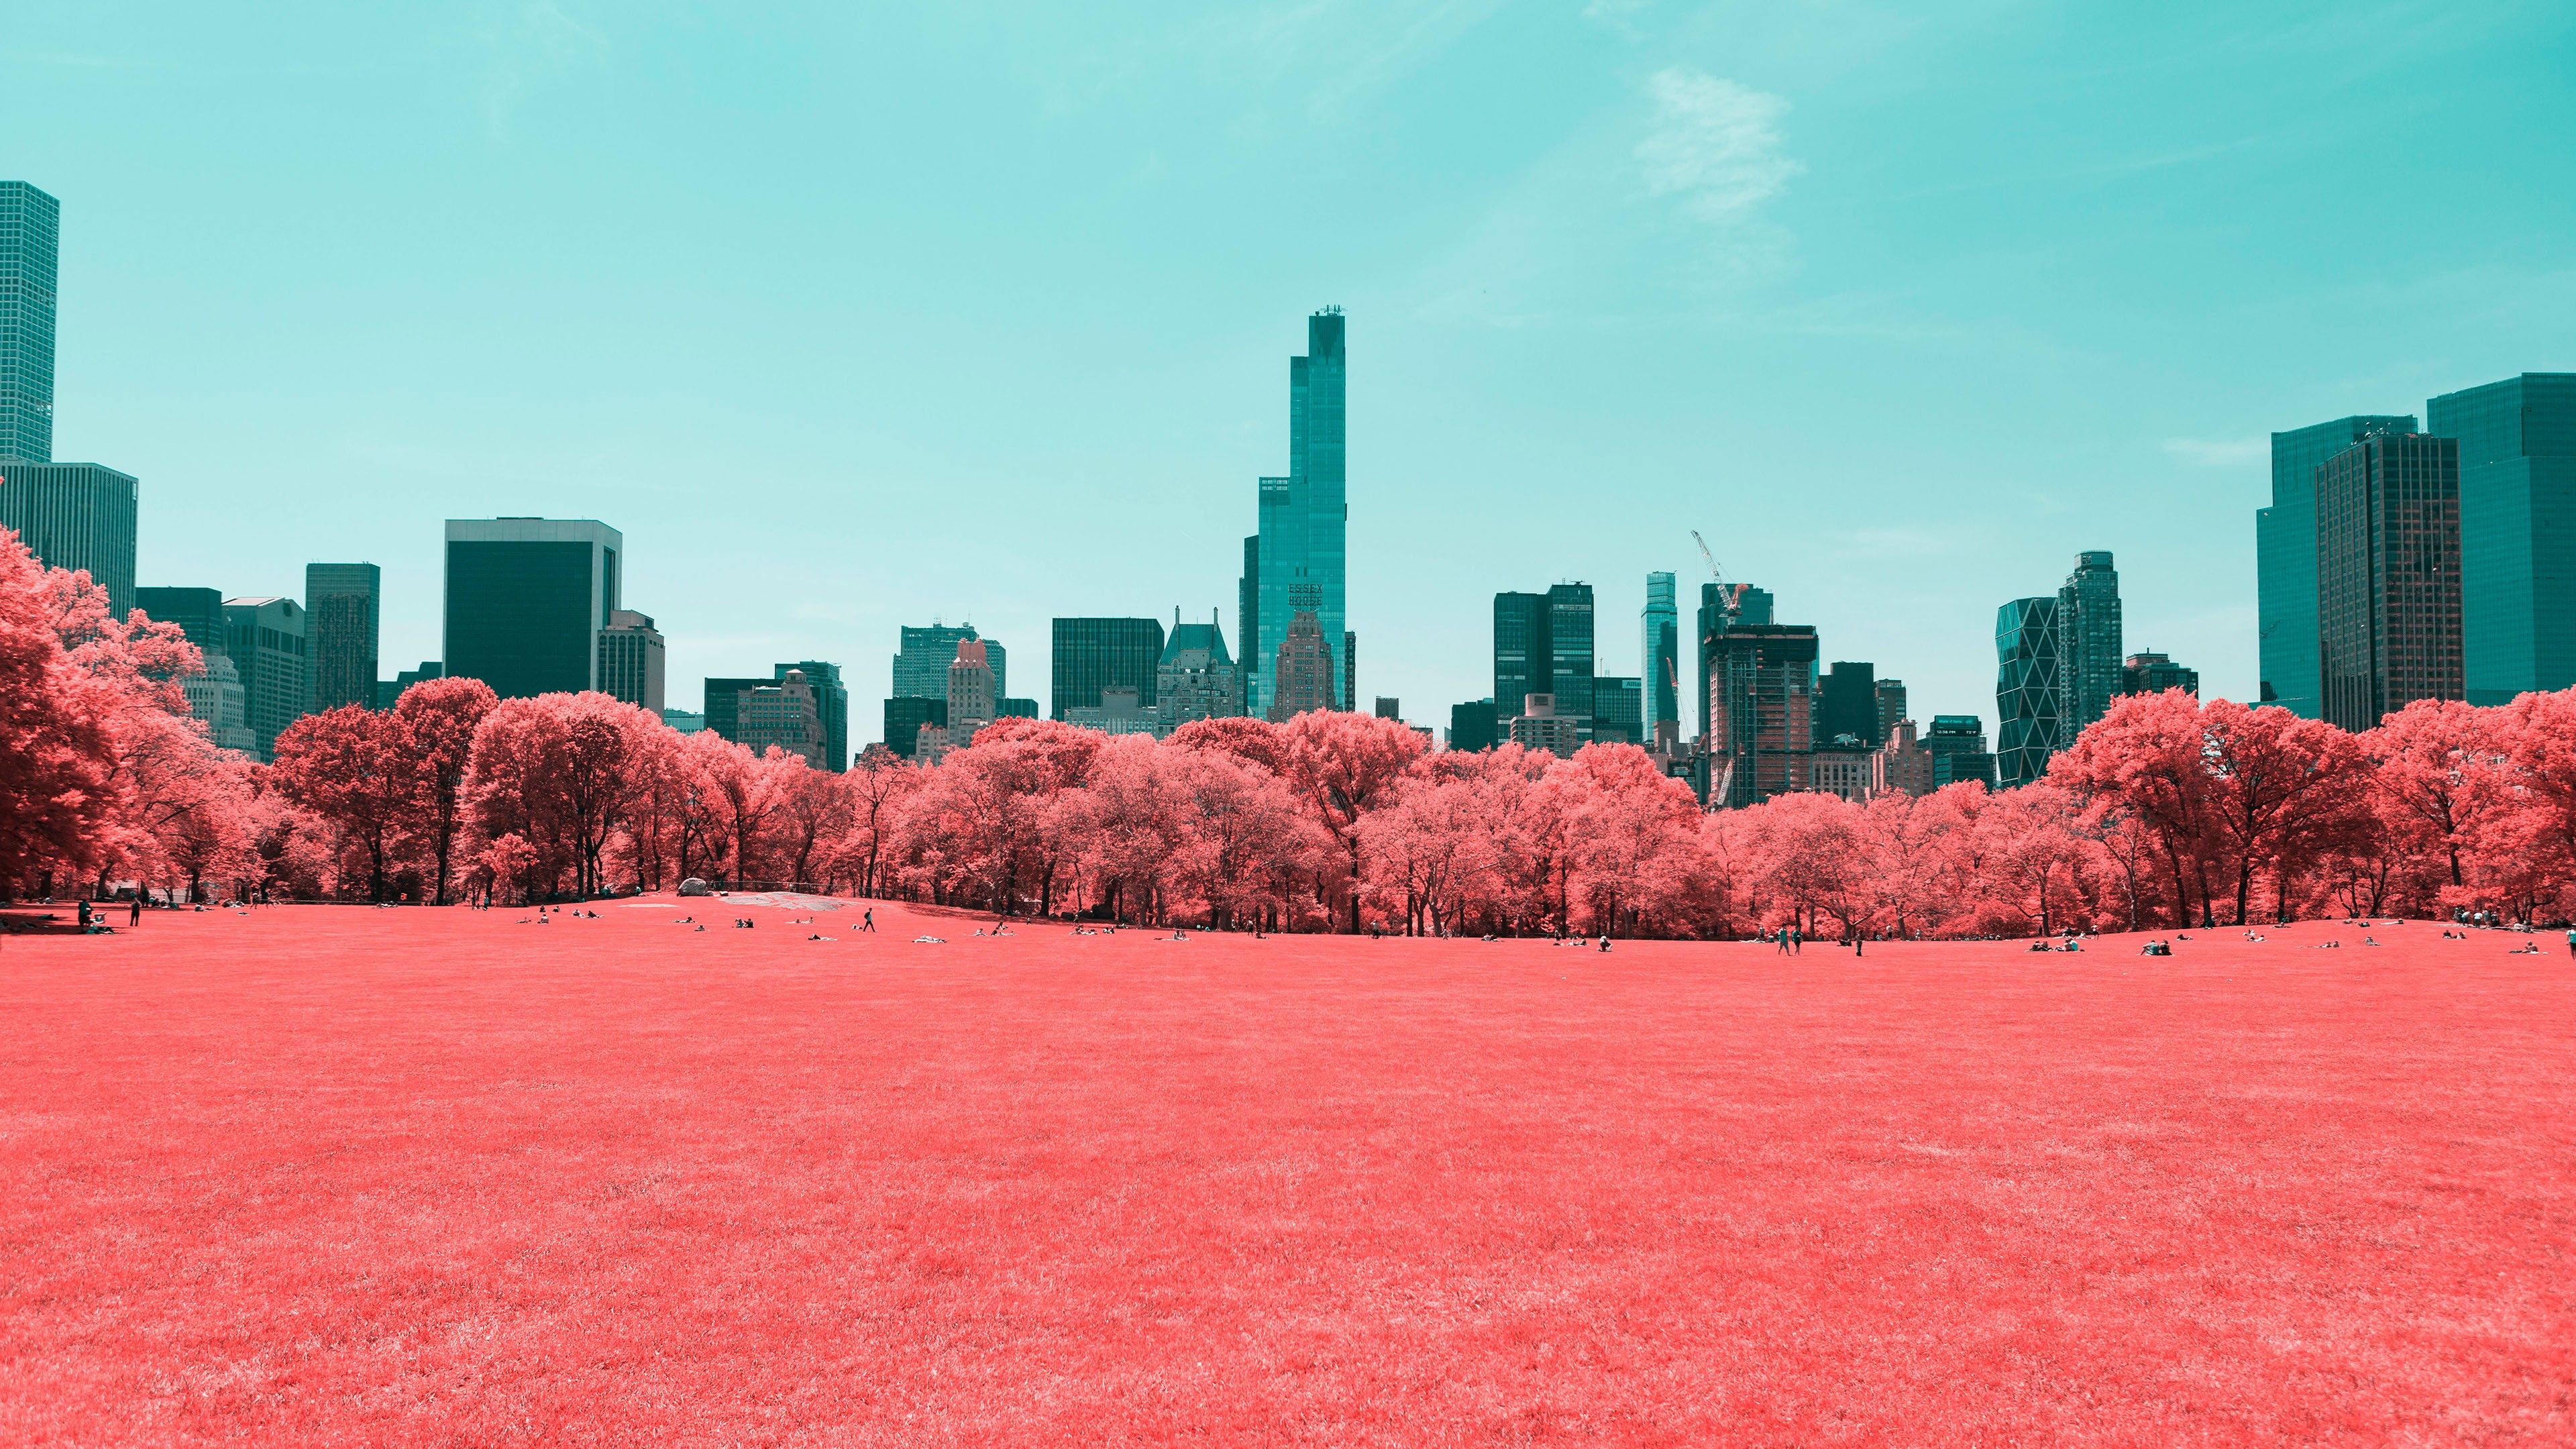 Wallpaper Central Park, Infrared, Manhattan, New York City, 4K, World,. Wallpaper for iPhone, Android, Mobile and Desktop